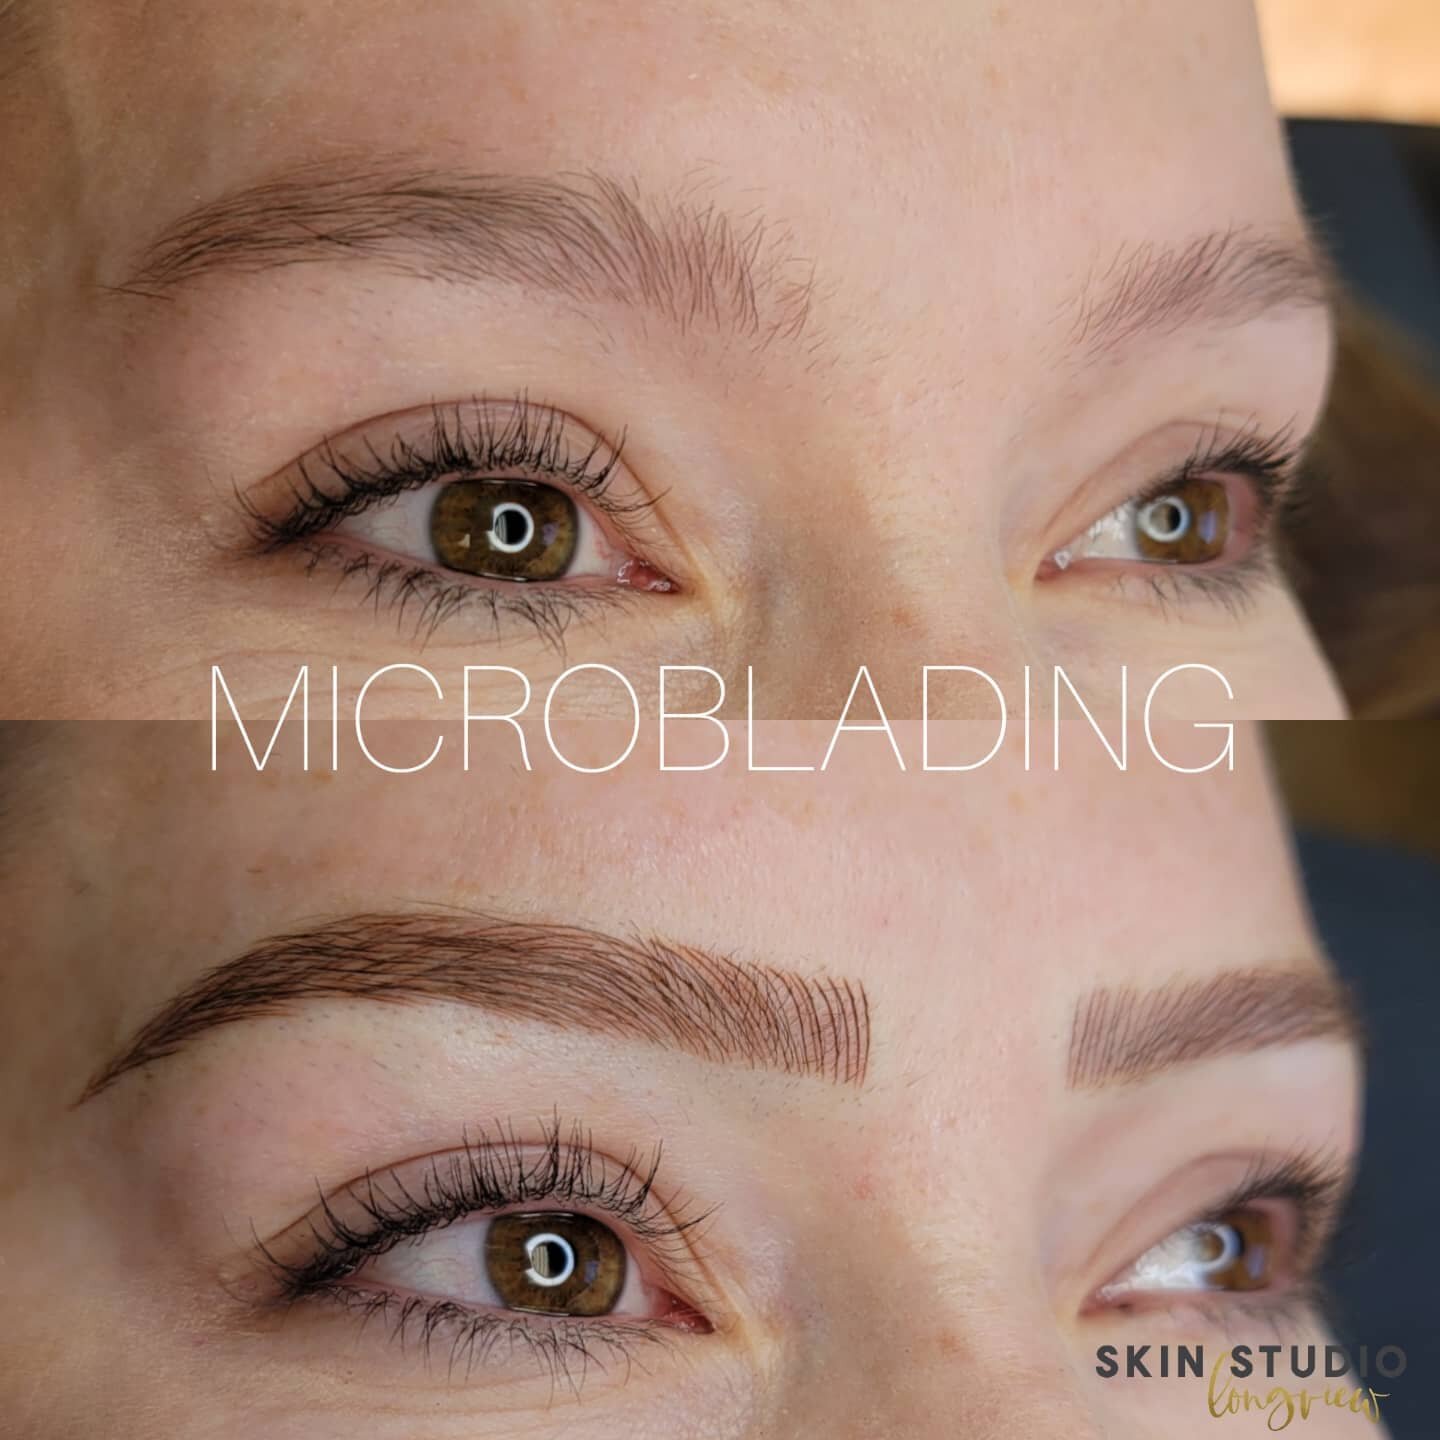 Welcome to the Good Brows Club 💕
 𝑩𝒐𝒐𝒌𝒊𝒏𝒈, 𝑭𝑨𝑸𝒔, 𝒎𝒐𝒓𝒆 𝒊𝒏𝒇𝒐 👇
www.skinstudiolongview.com
𝑪𝒐𝒏𝒕𝒂𝒄𝒕 𝒎𝒆 (𝑒𝑚𝑎𝑖𝑙 𝑜𝑛𝑙𝑦) 👇 
skinstudiolongview@gmail.com
&bull;
&bull;
&bull;
&bull;
&bull;
&bull;
&bull;
&bull;
&bull; #br